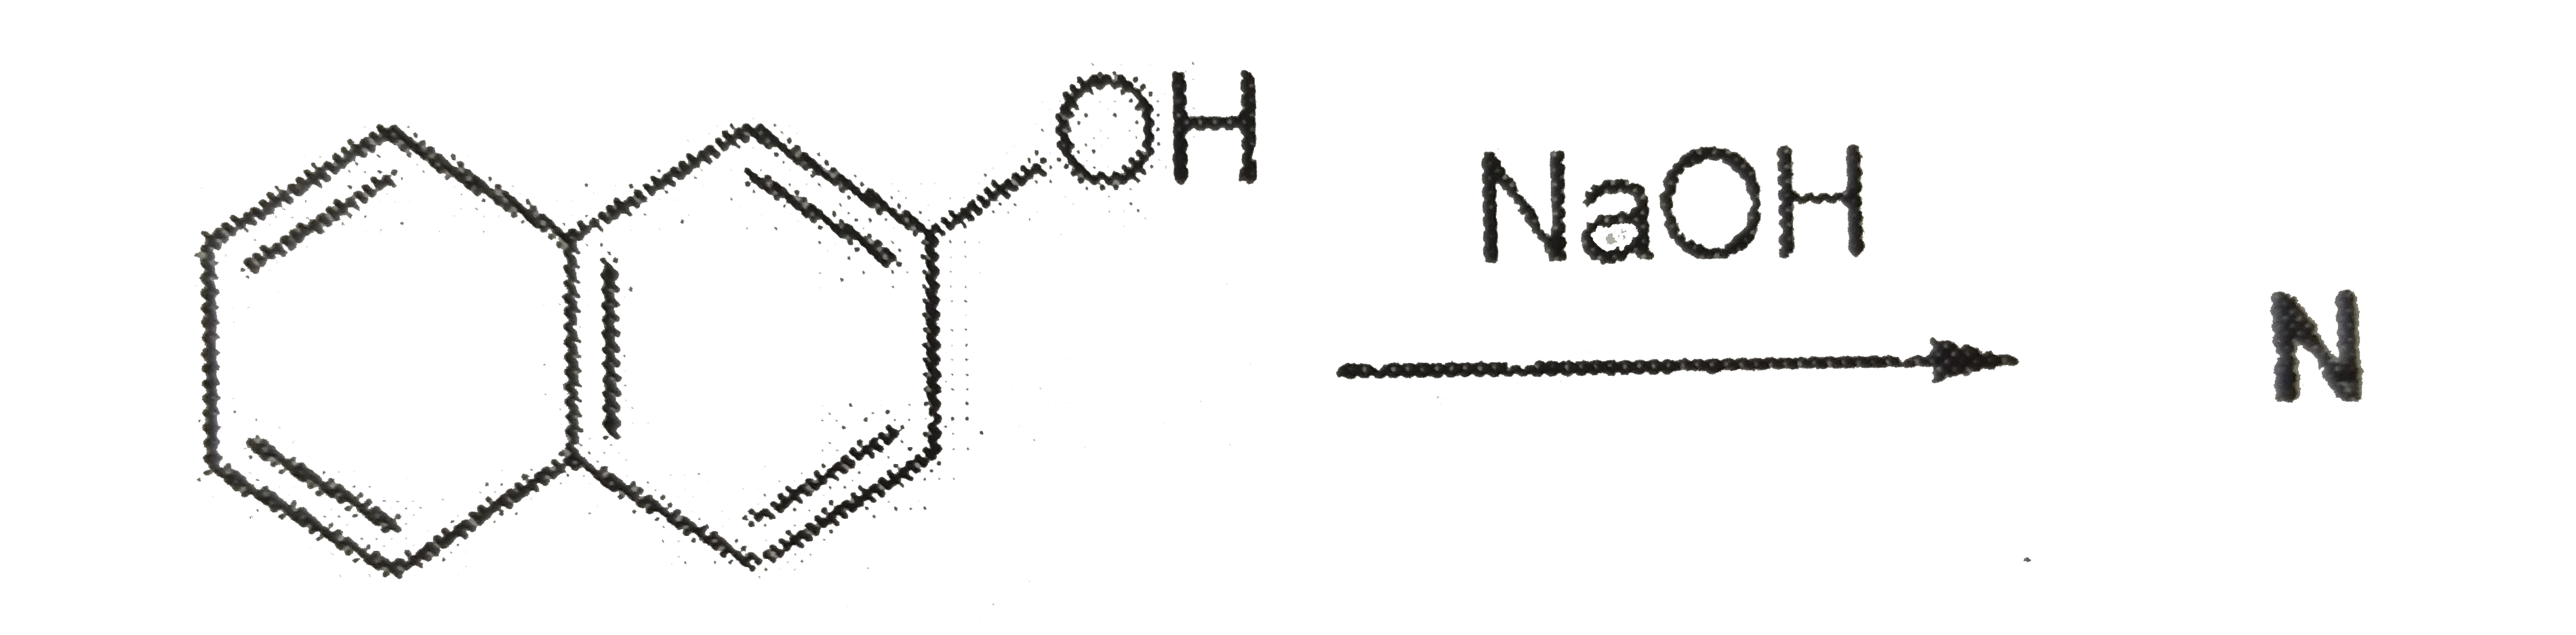 The number of resonance structures for N is